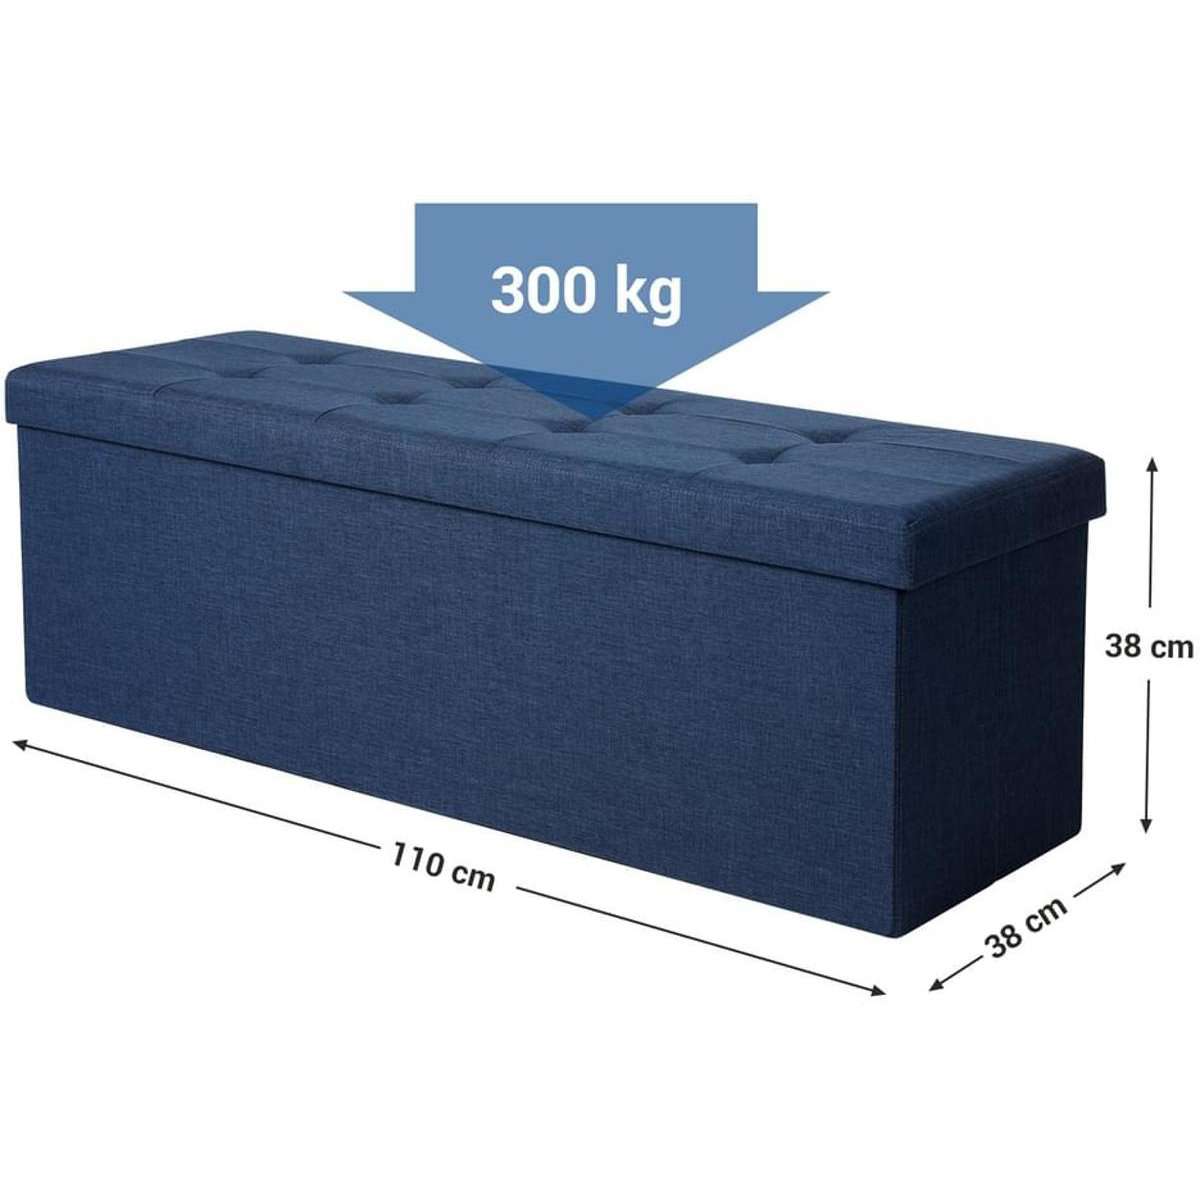 Nancy's Hocker Blue Large - Sofa With Storage Space - Sofa - Footstools - 120L